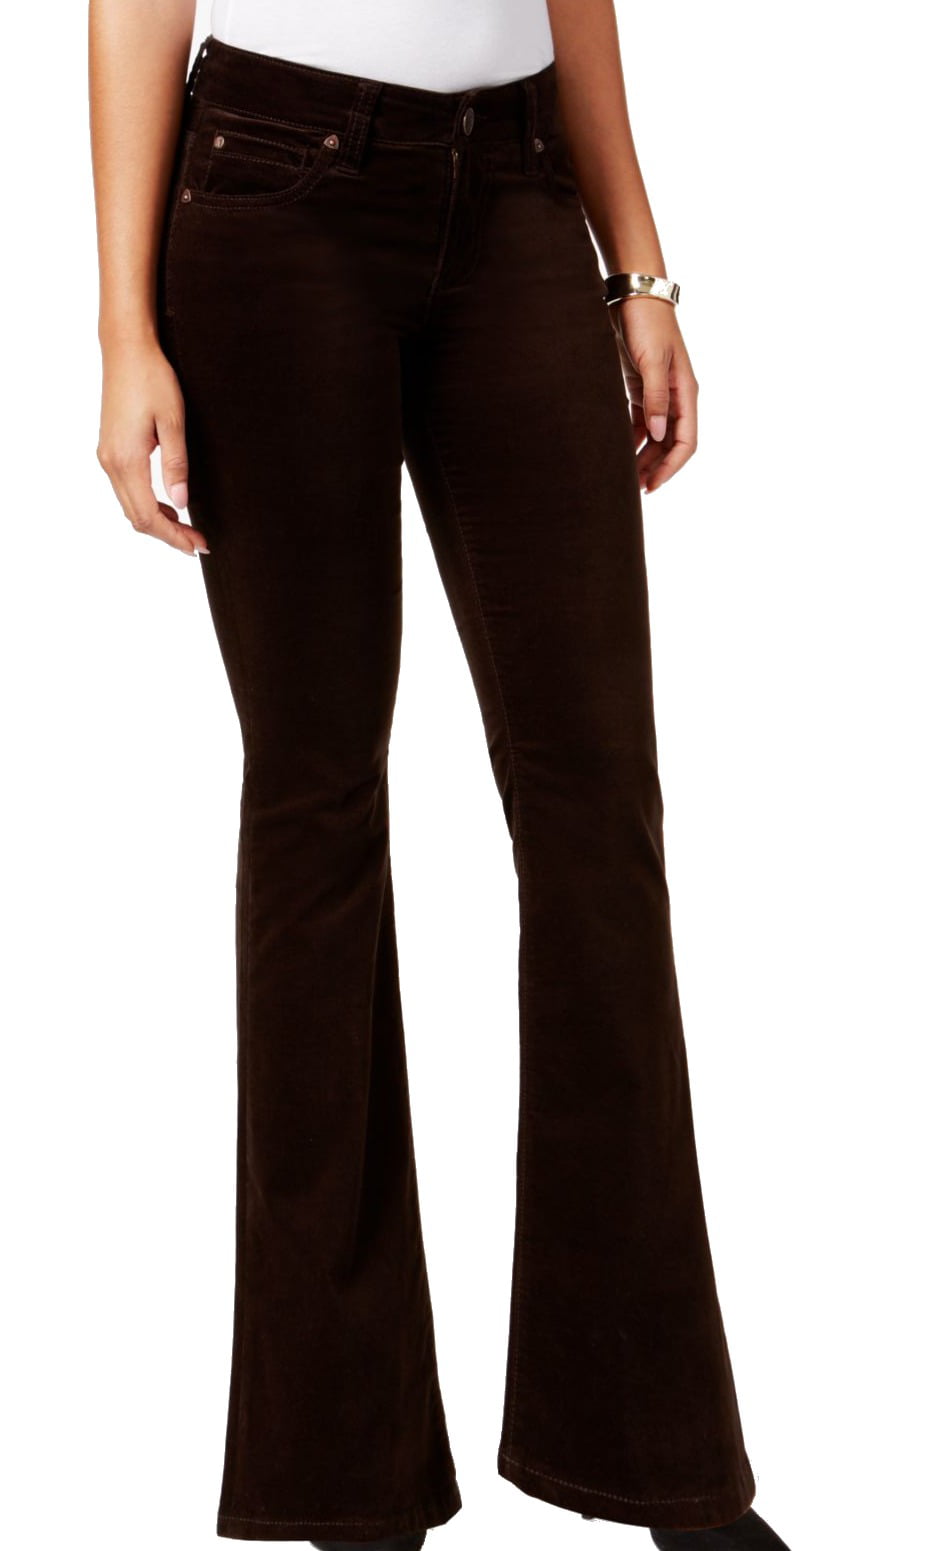 KUT from the Kloth - Kut From The Kloth NEW Chocolate Brown Women Size ...